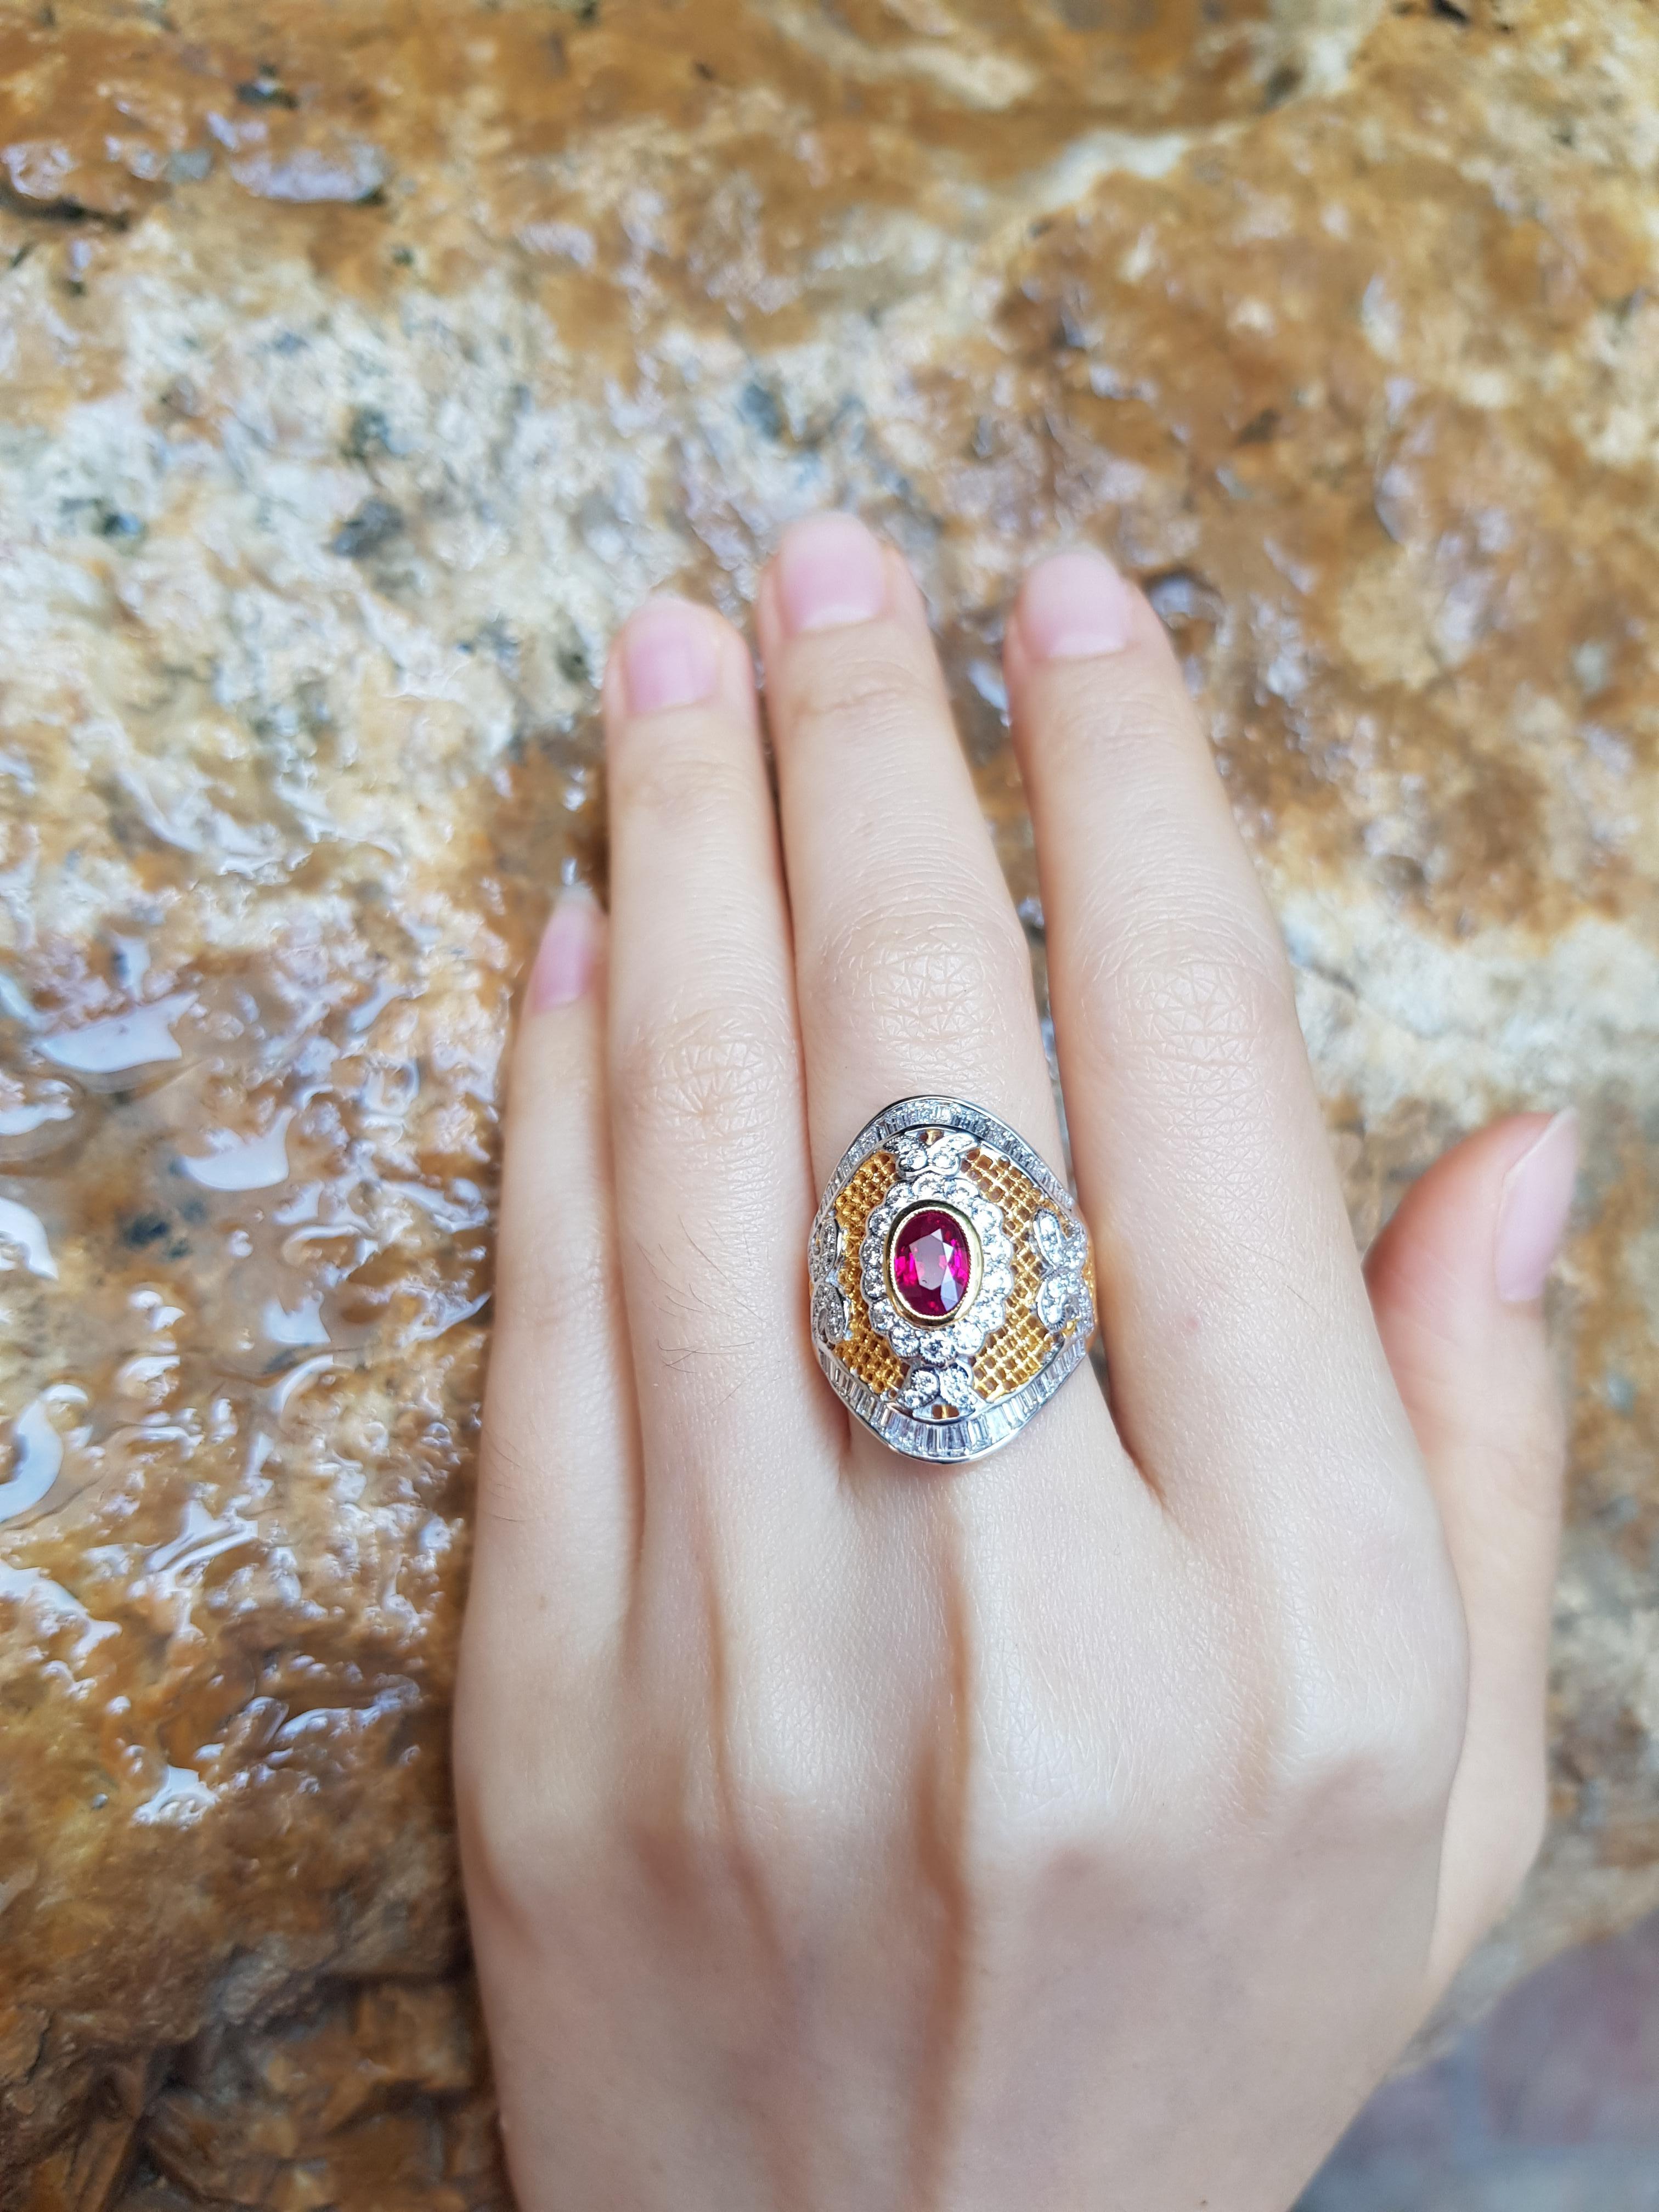 Ruby 1.04 carats with Diamond 0.81 carat Ring set in 18 Karat Gold Settings

Width:  1.8 cm 
Length: 2.5 cm
Ring Size: 53
Total Weight: 7.78 grams

